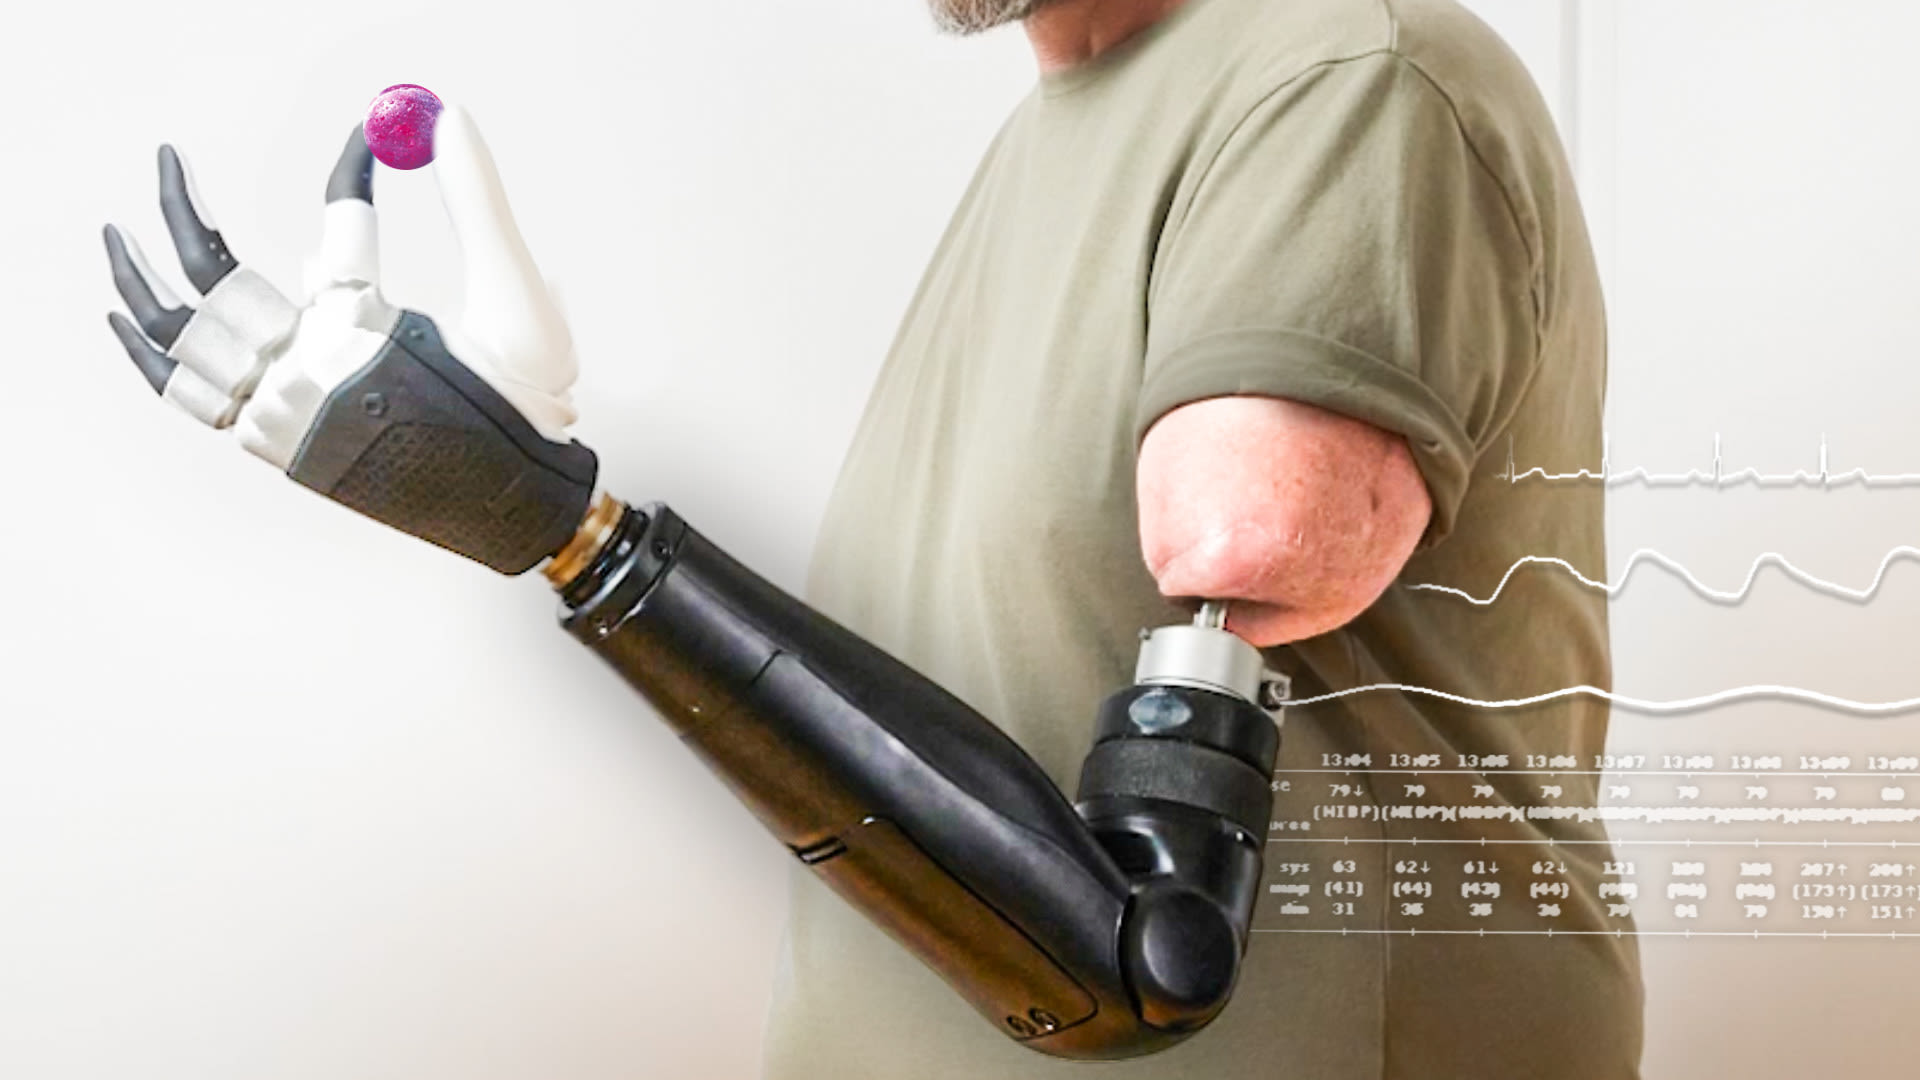 Groundbreaking' bionic arm that fuses with user's skeleton and nerves could  advance amputee care